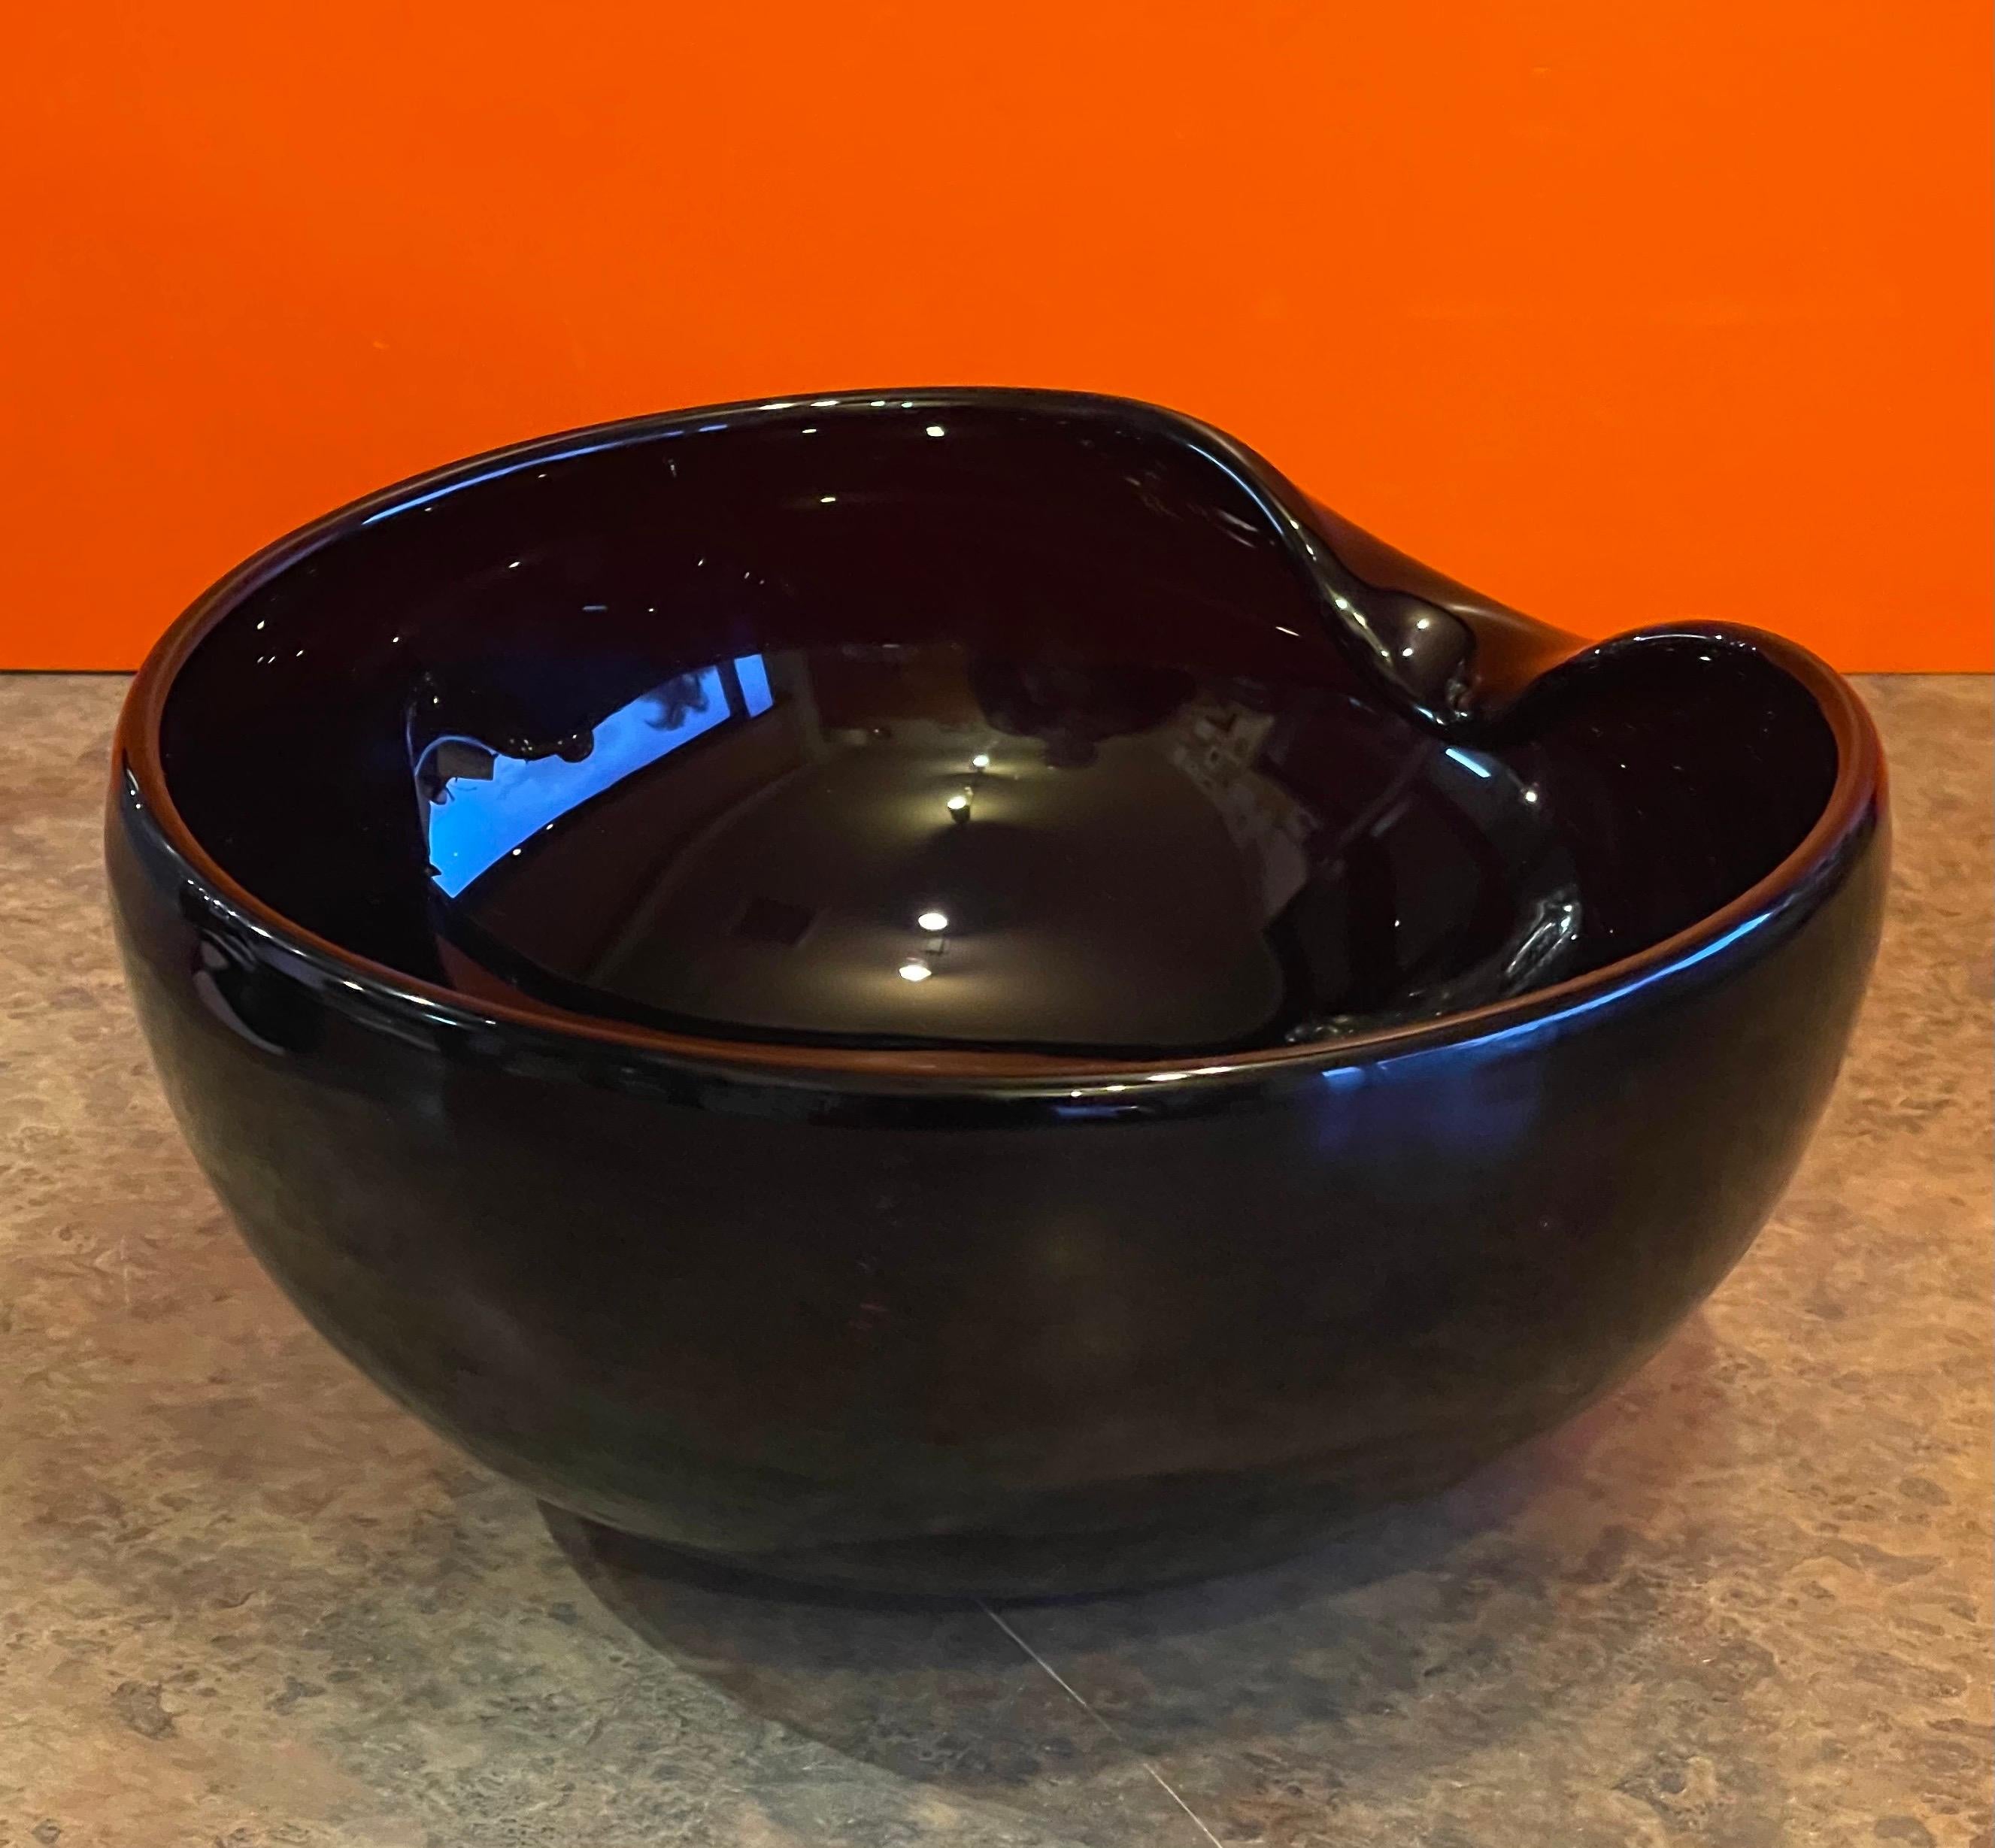 Spectacular black art glass thumbprint centerpiece bowl by Elsa Peretti for Tiffany and Co., circa 1990s. The bowl is in excellent condition and measures 11